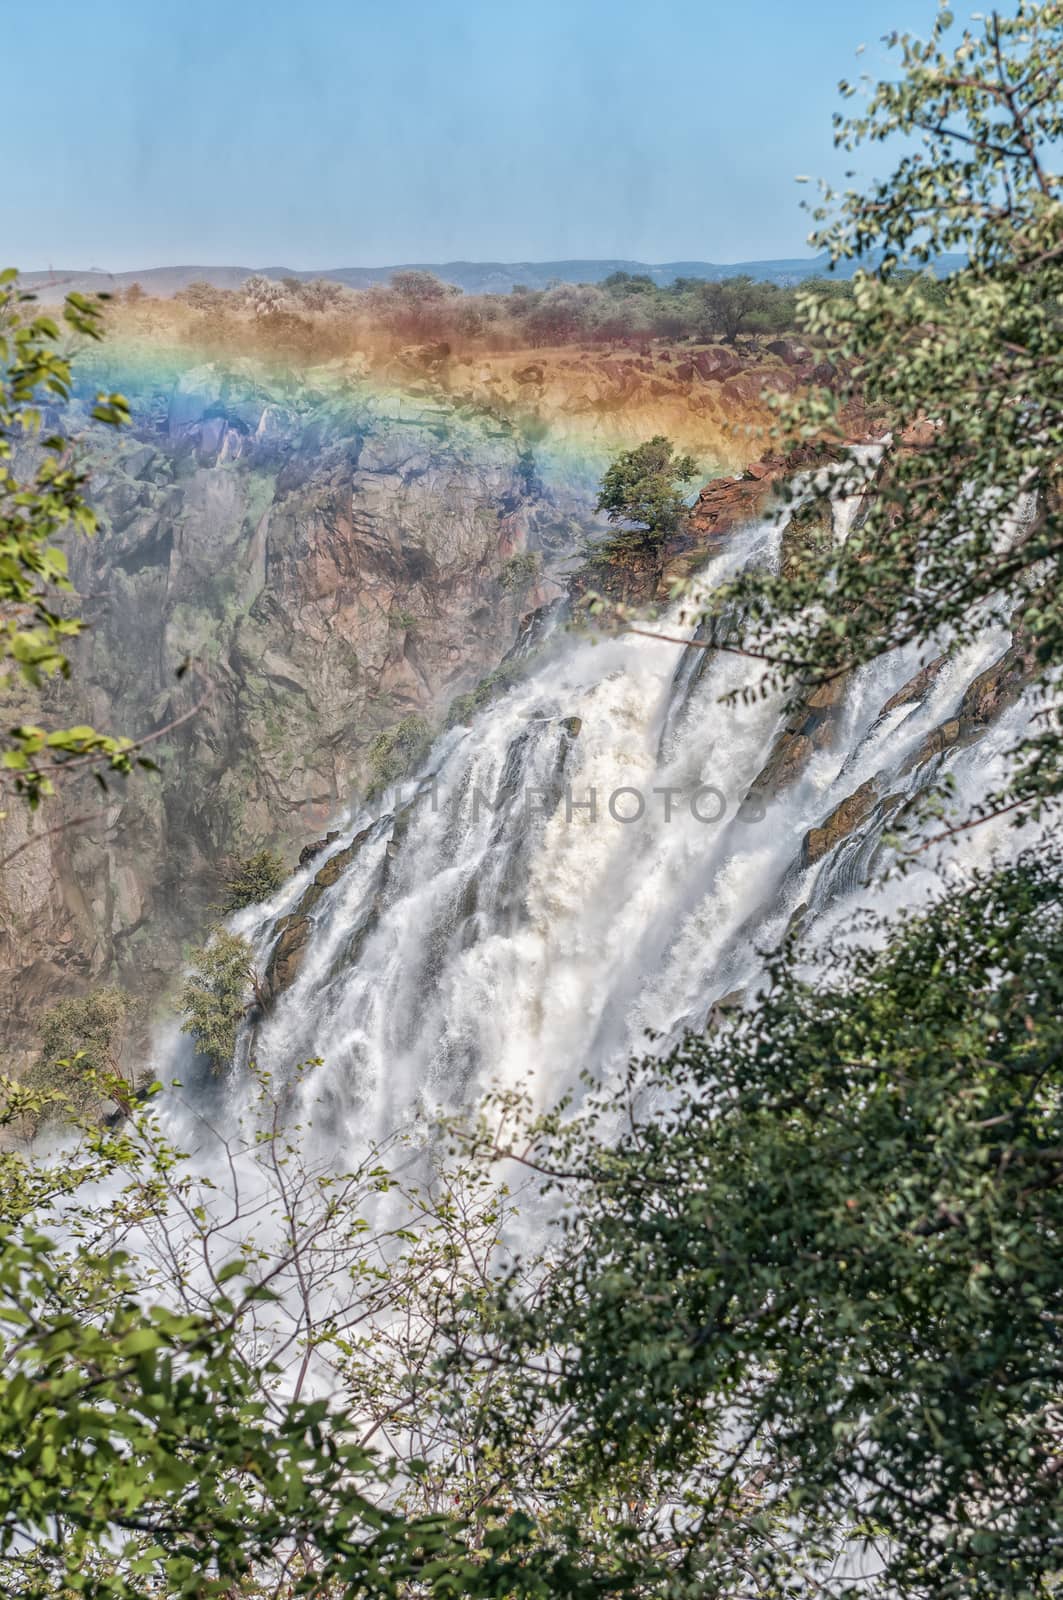 Part of the Ruacana waterfall in the Kunene River. A rainbow is visible